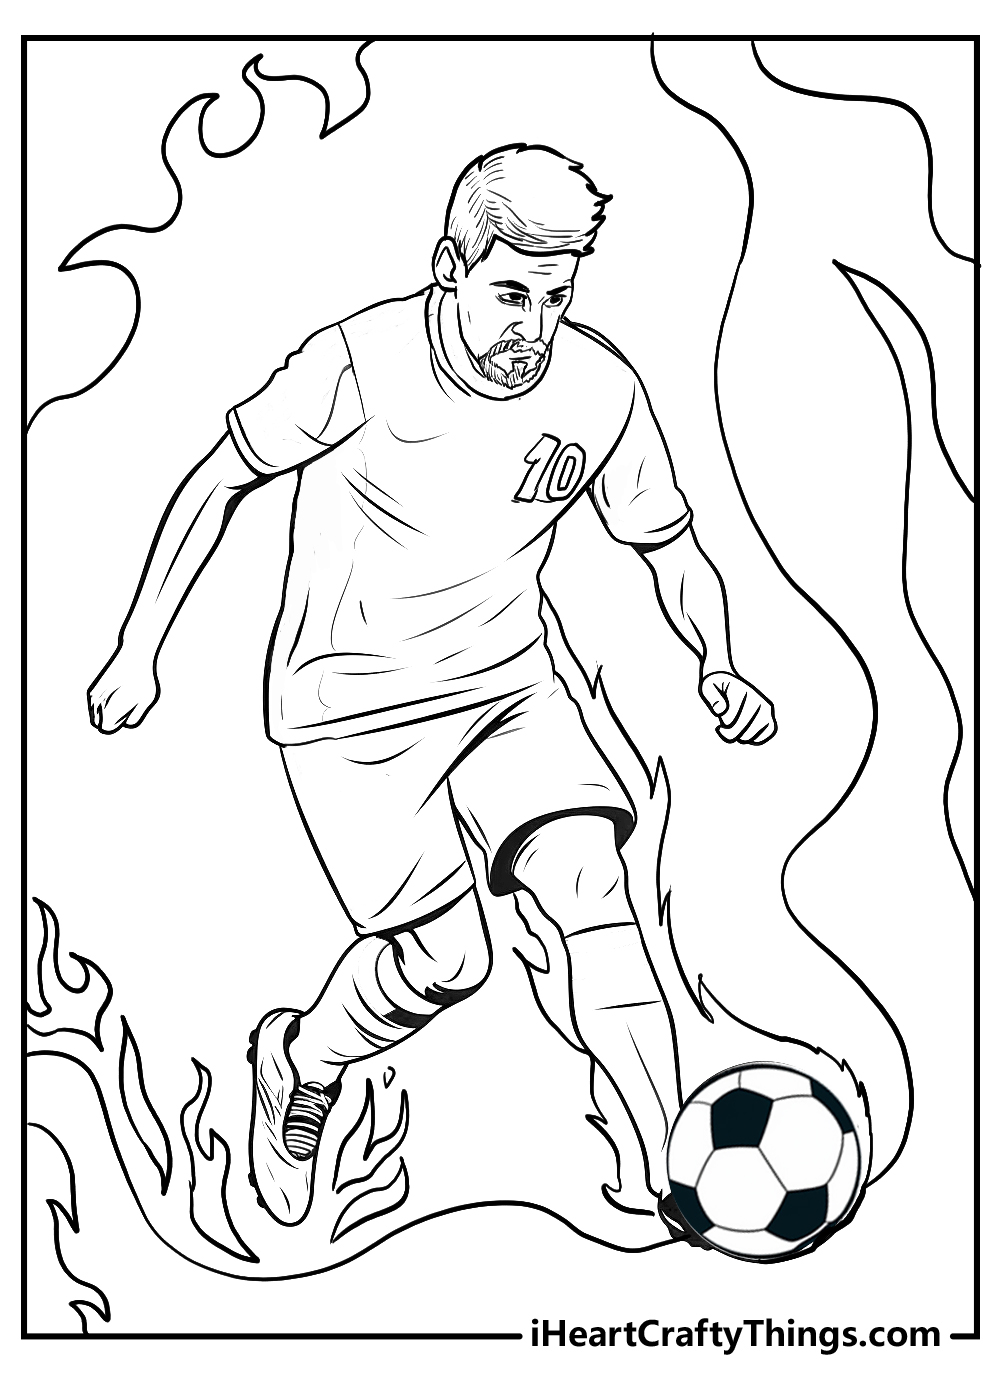 lionel messi coloring sheet free download